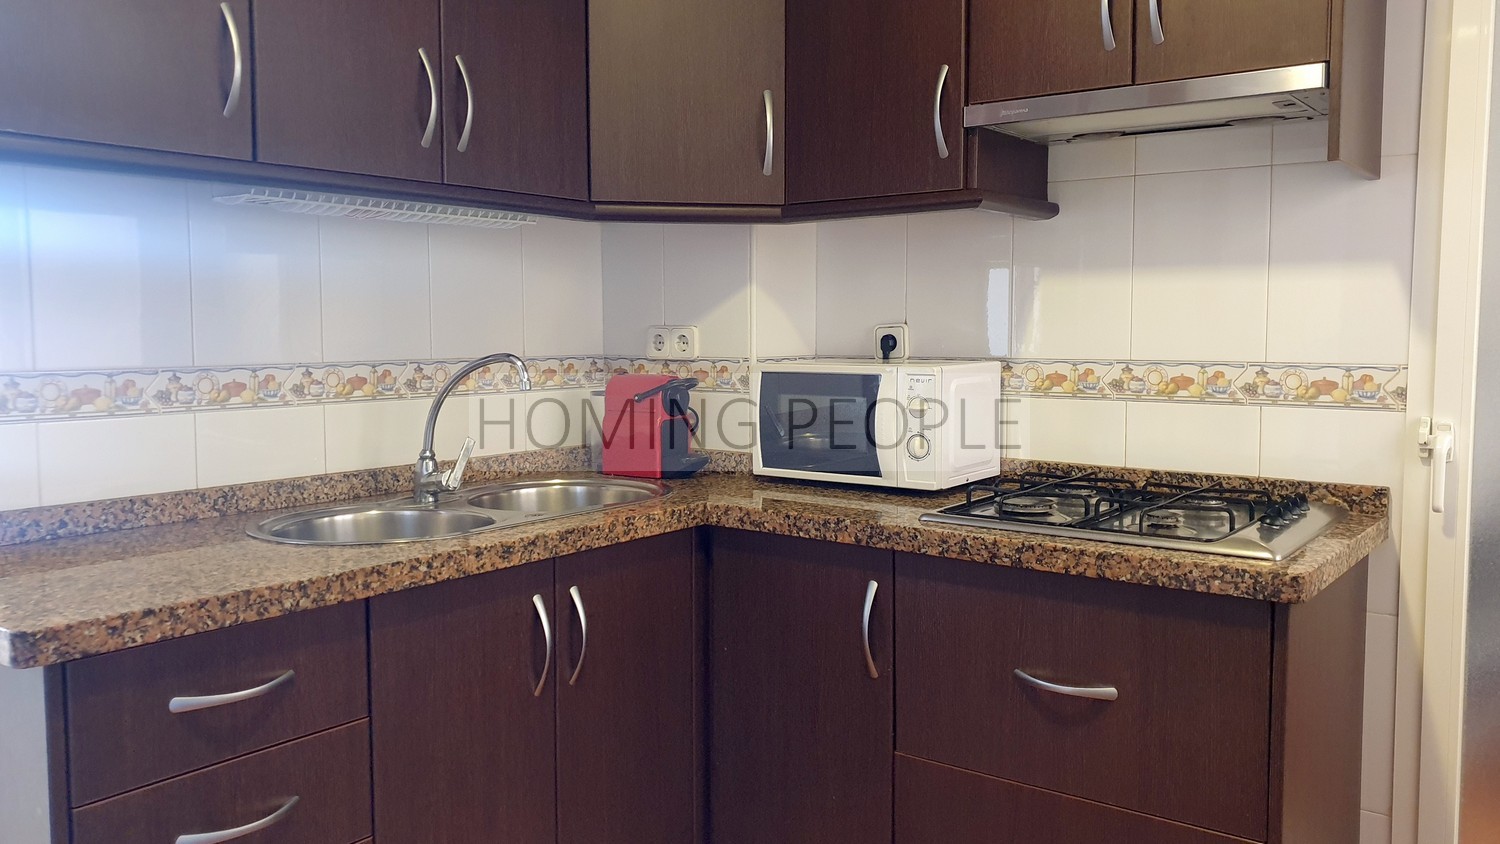 [RENTED OUT]: Second line flat with terrace... within walking distance to all amenities